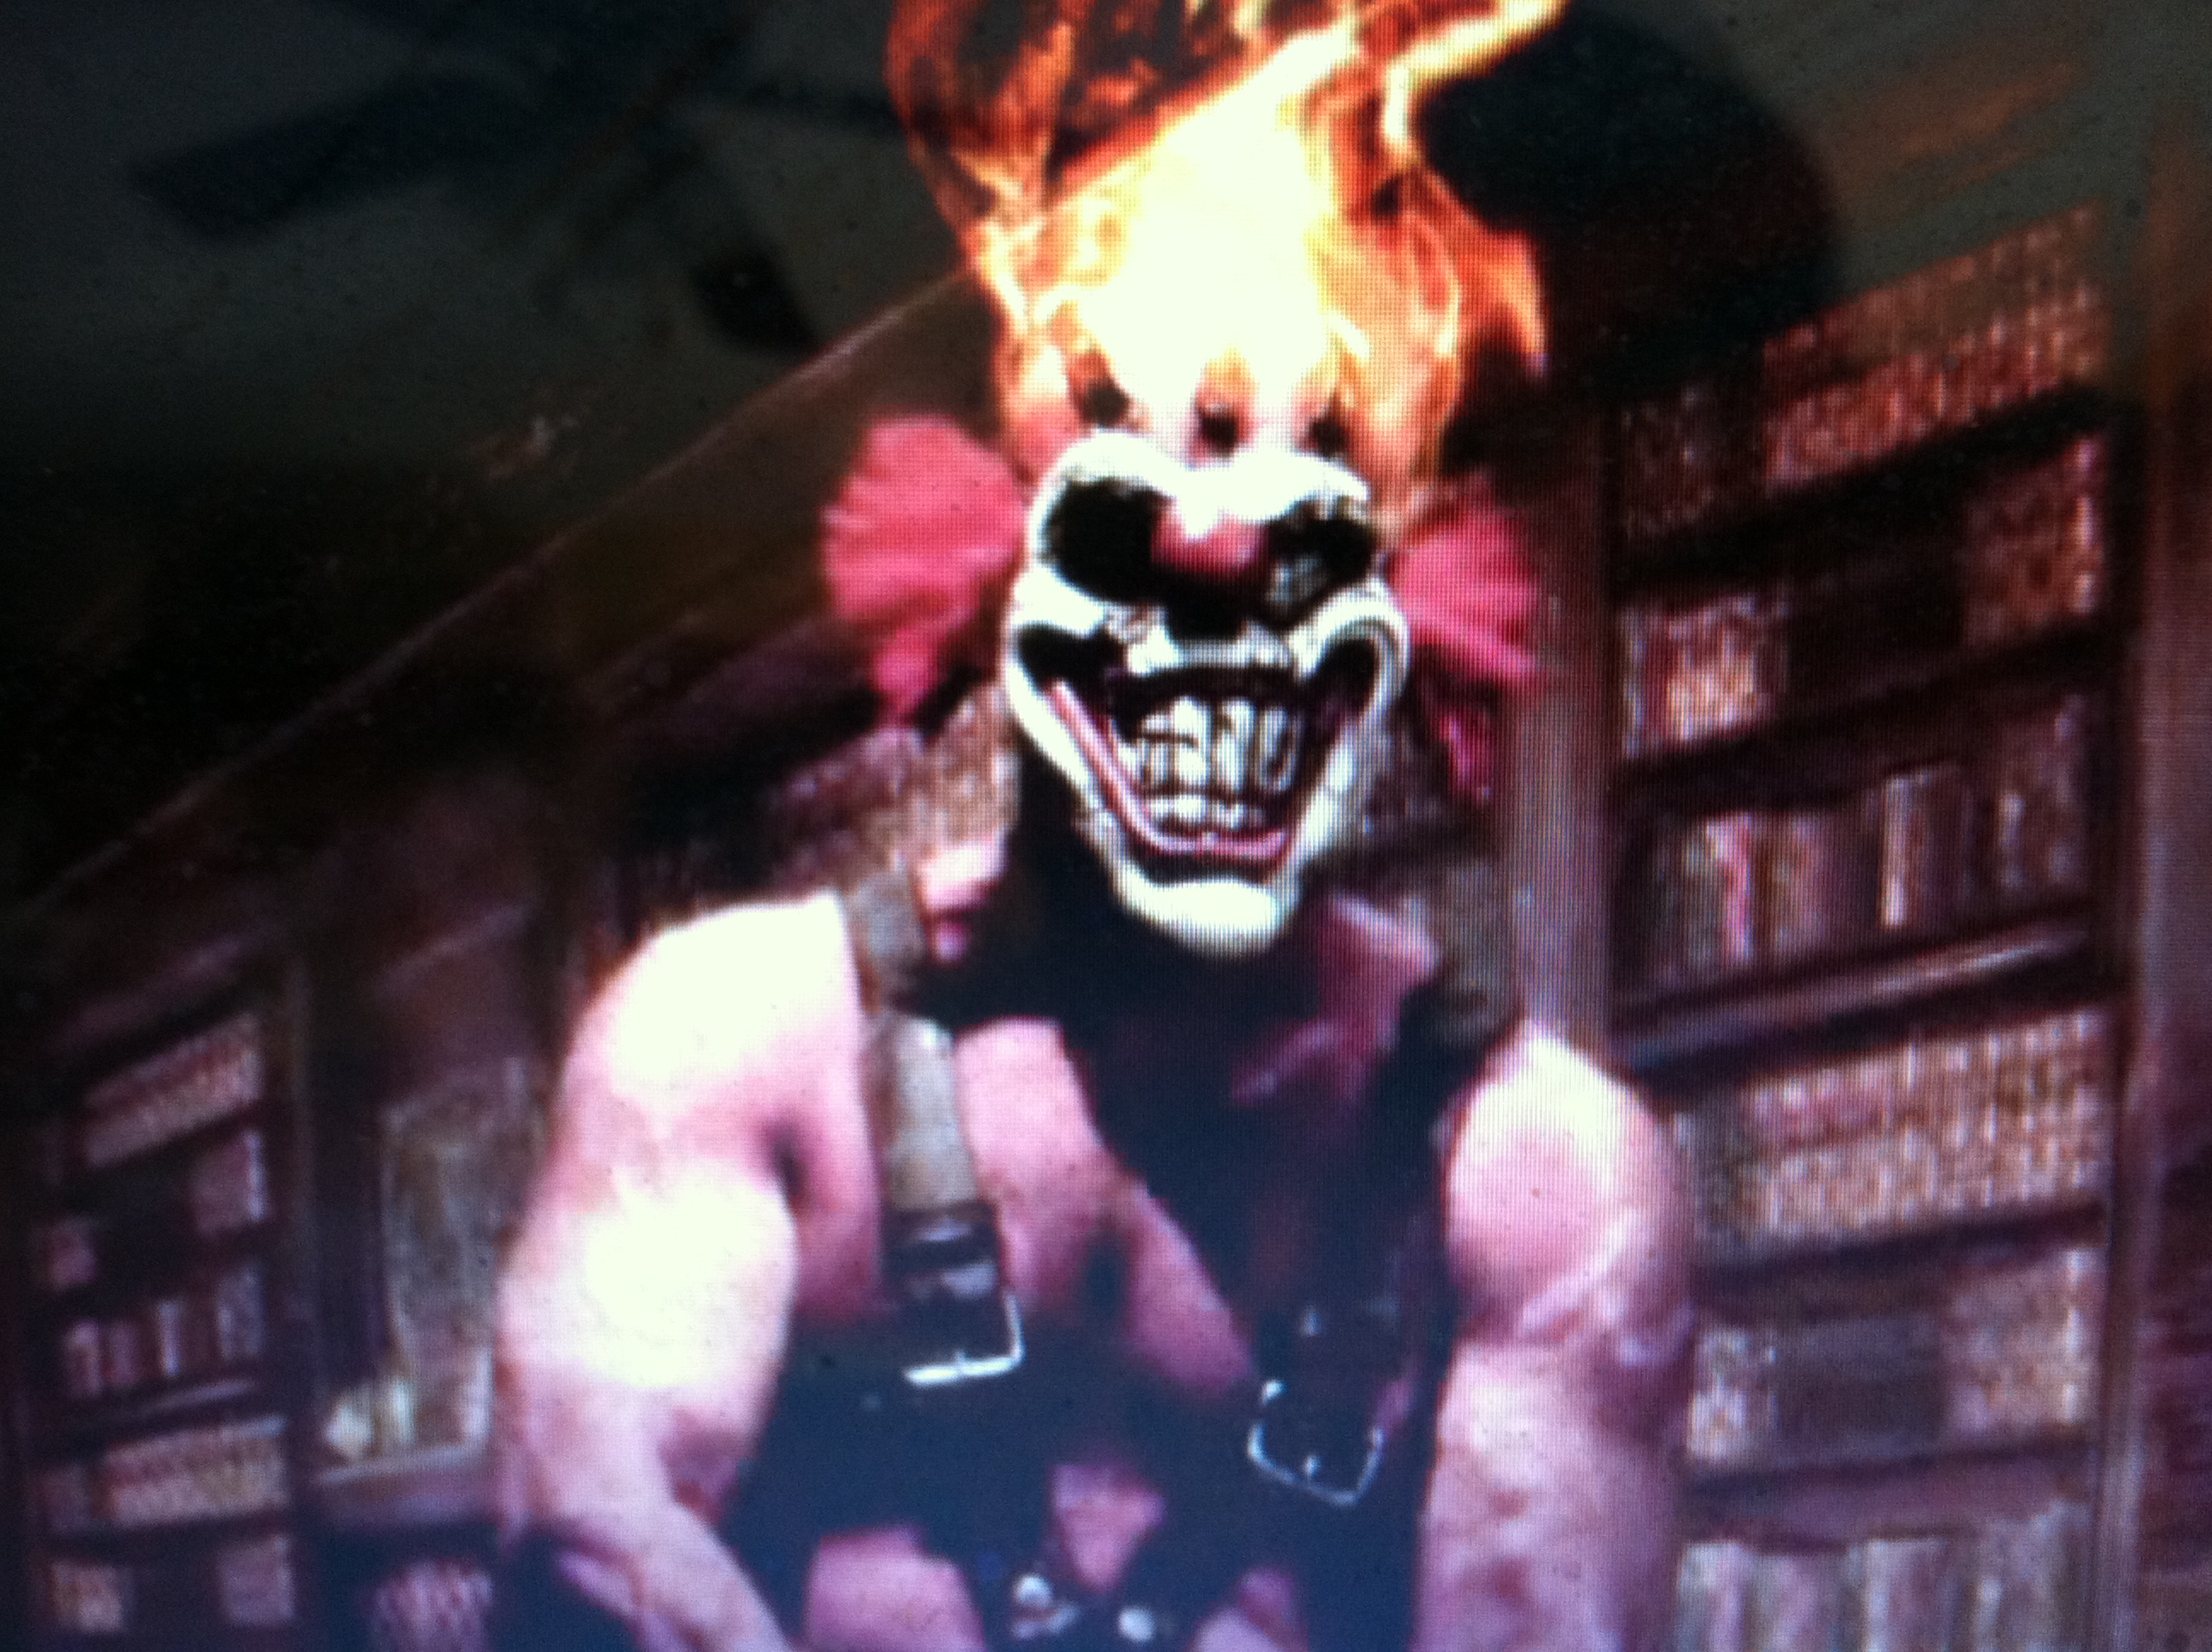 Here I am as Sweet Tooth of the video game Twisted Metal. Movie is on Utub